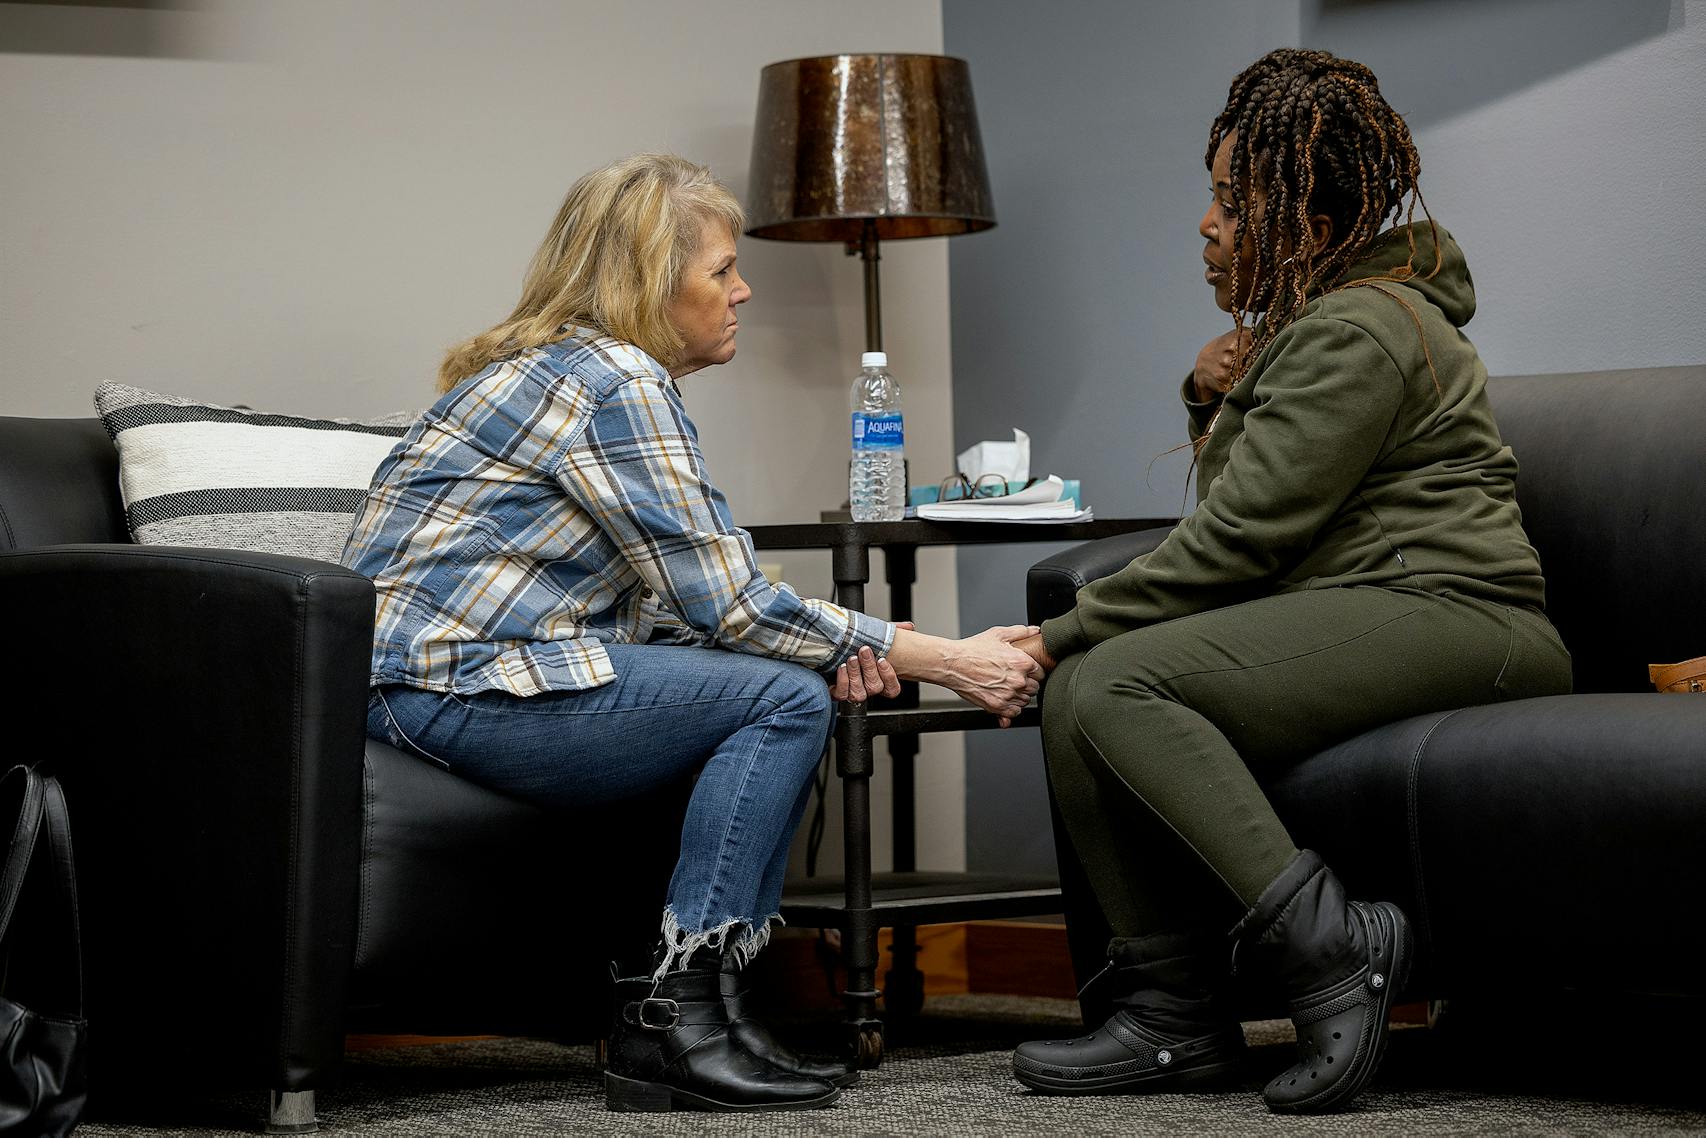 Before a support group meeting, Pam Lanhart talked with Holly Marshall, who told about her son's battle with addiction. 